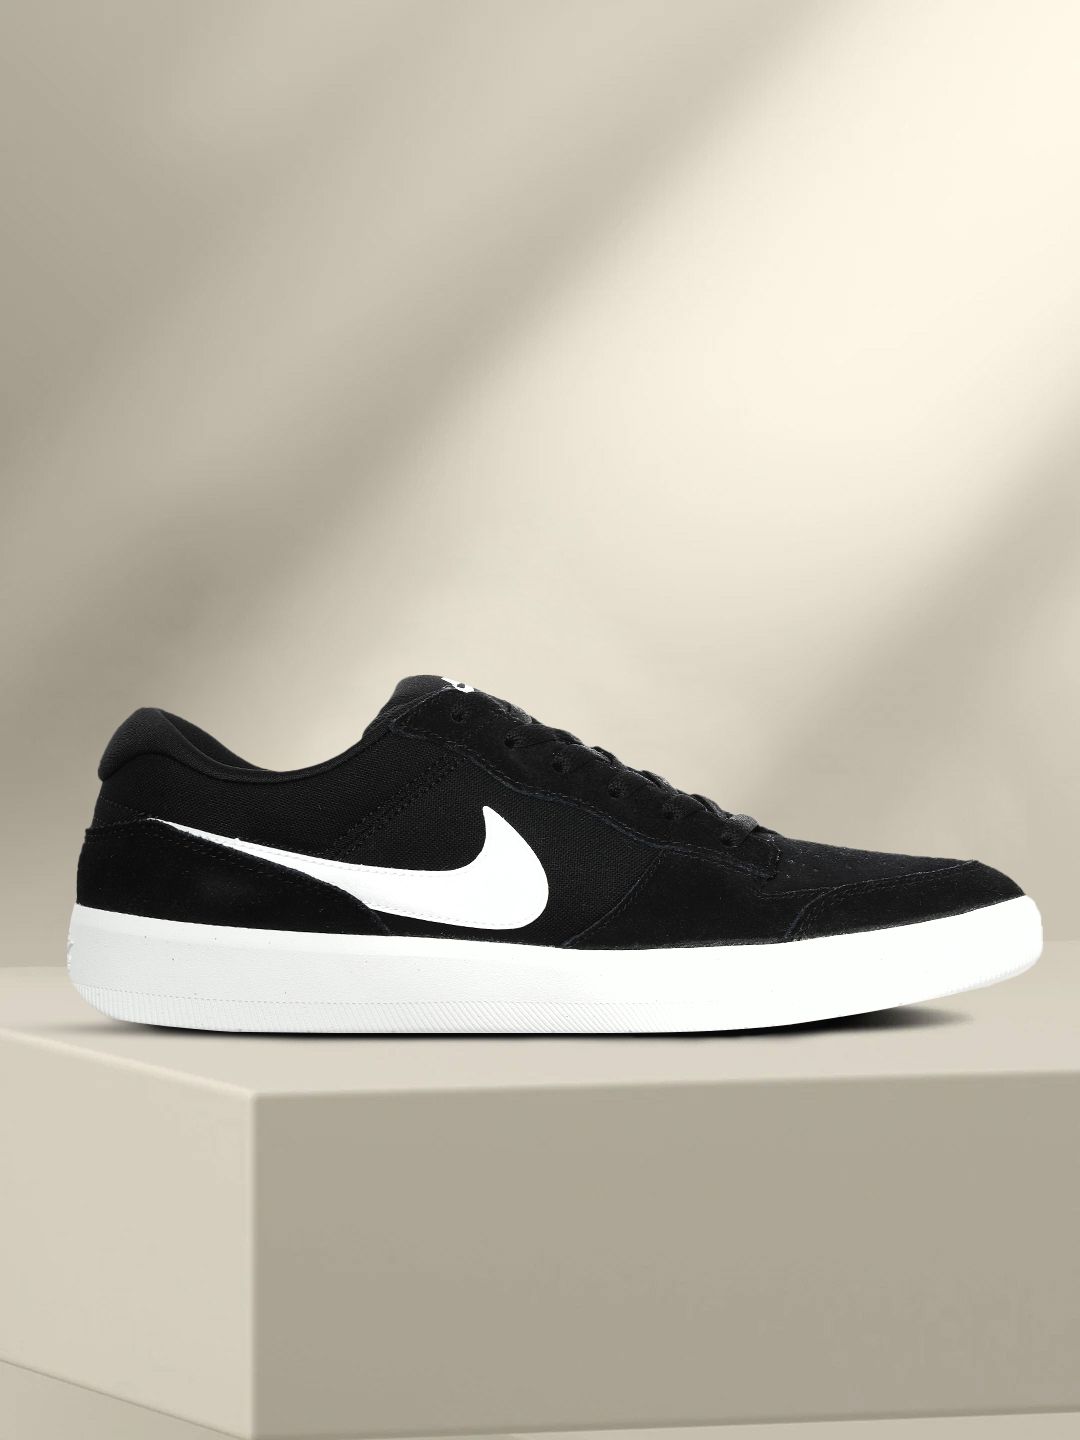 Nike Unisex Black Suede FORCE 58 Suede Skateboarding Shoes Price in India